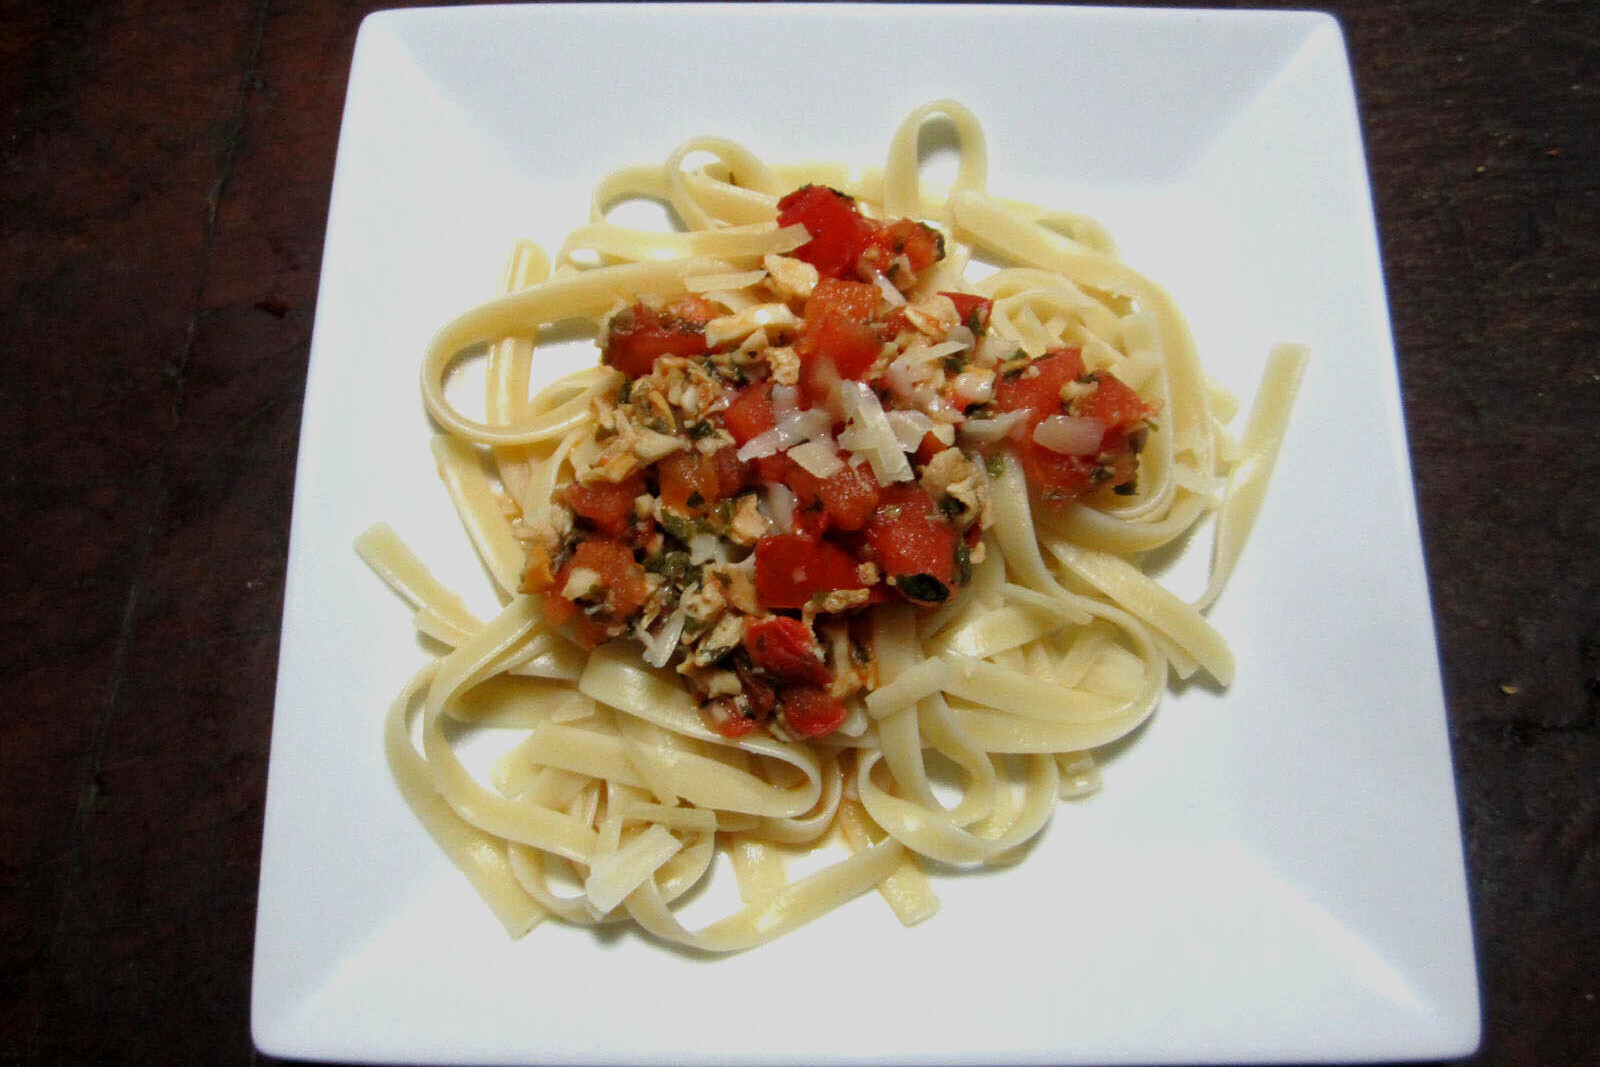 Pasta with red clam sauce